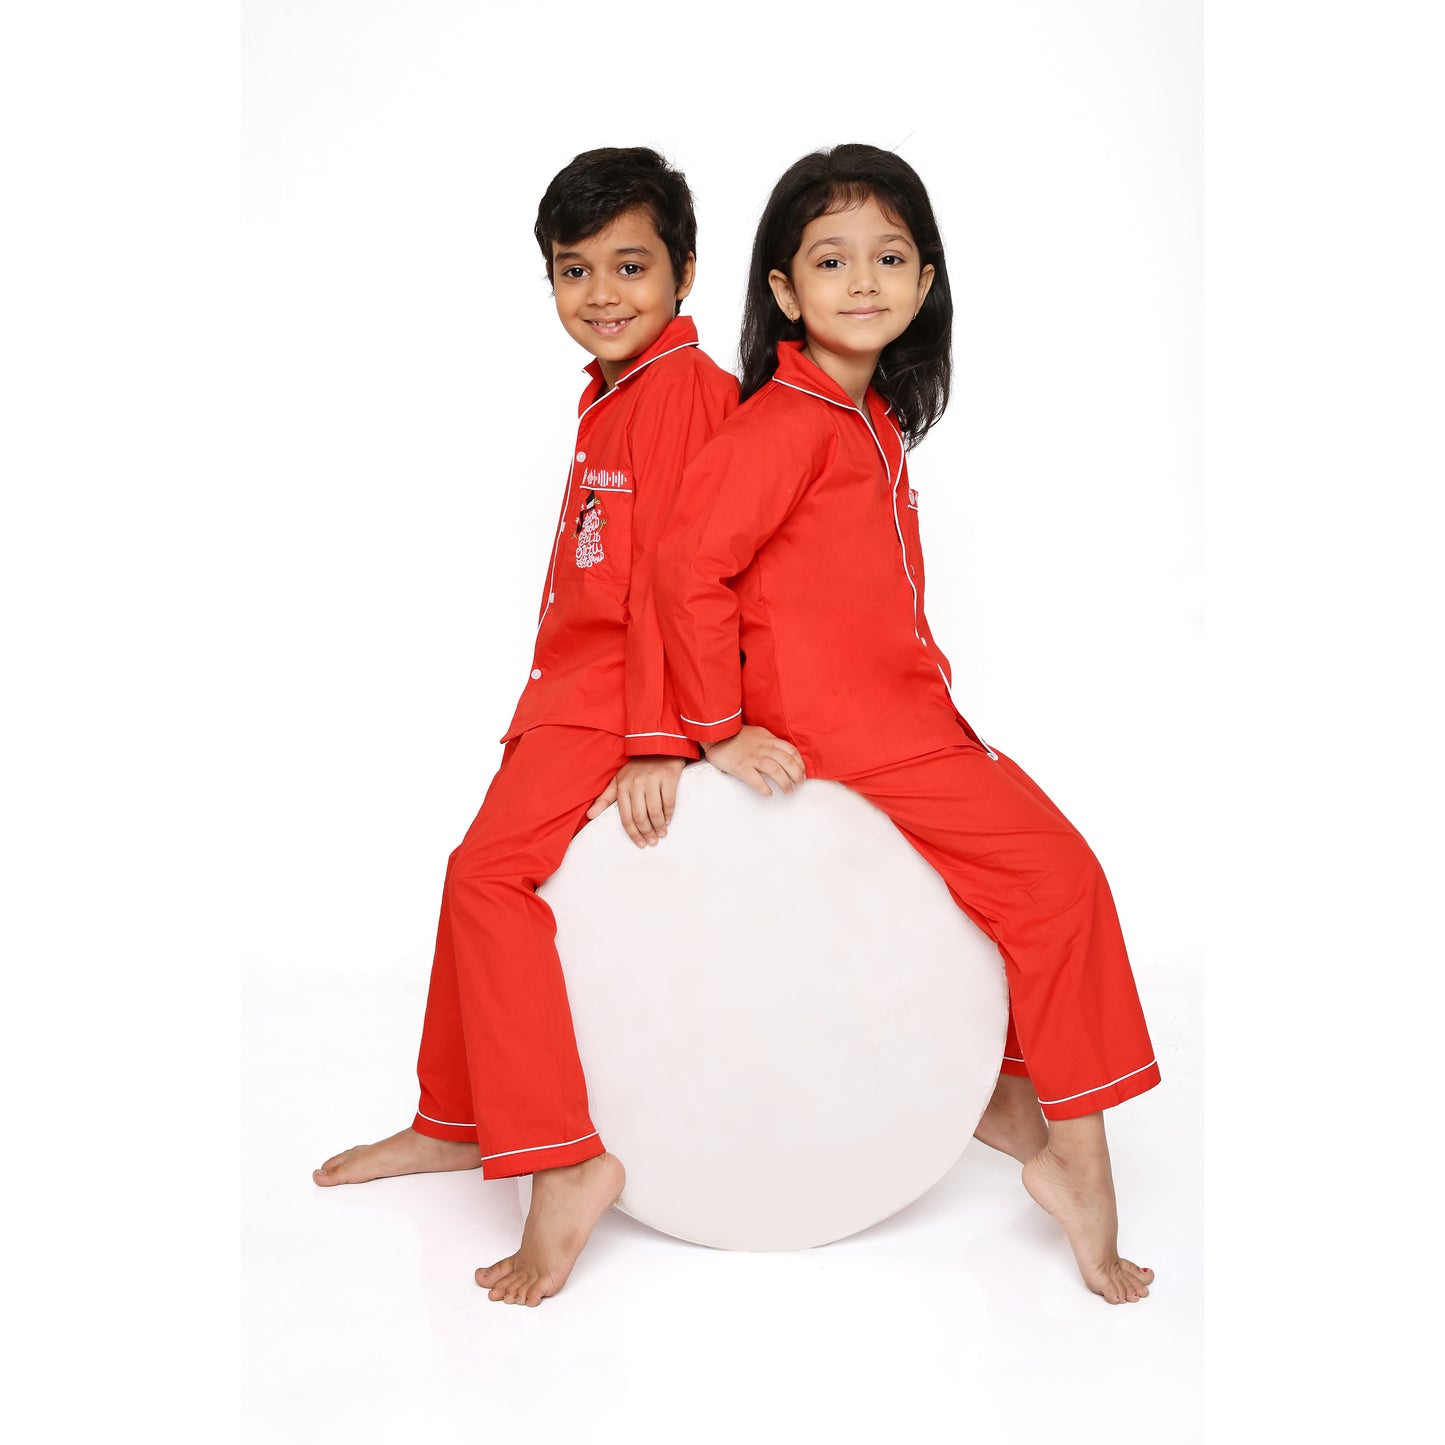 Red Poplin Night Suit With Let It Snow Emboidery On Pocket